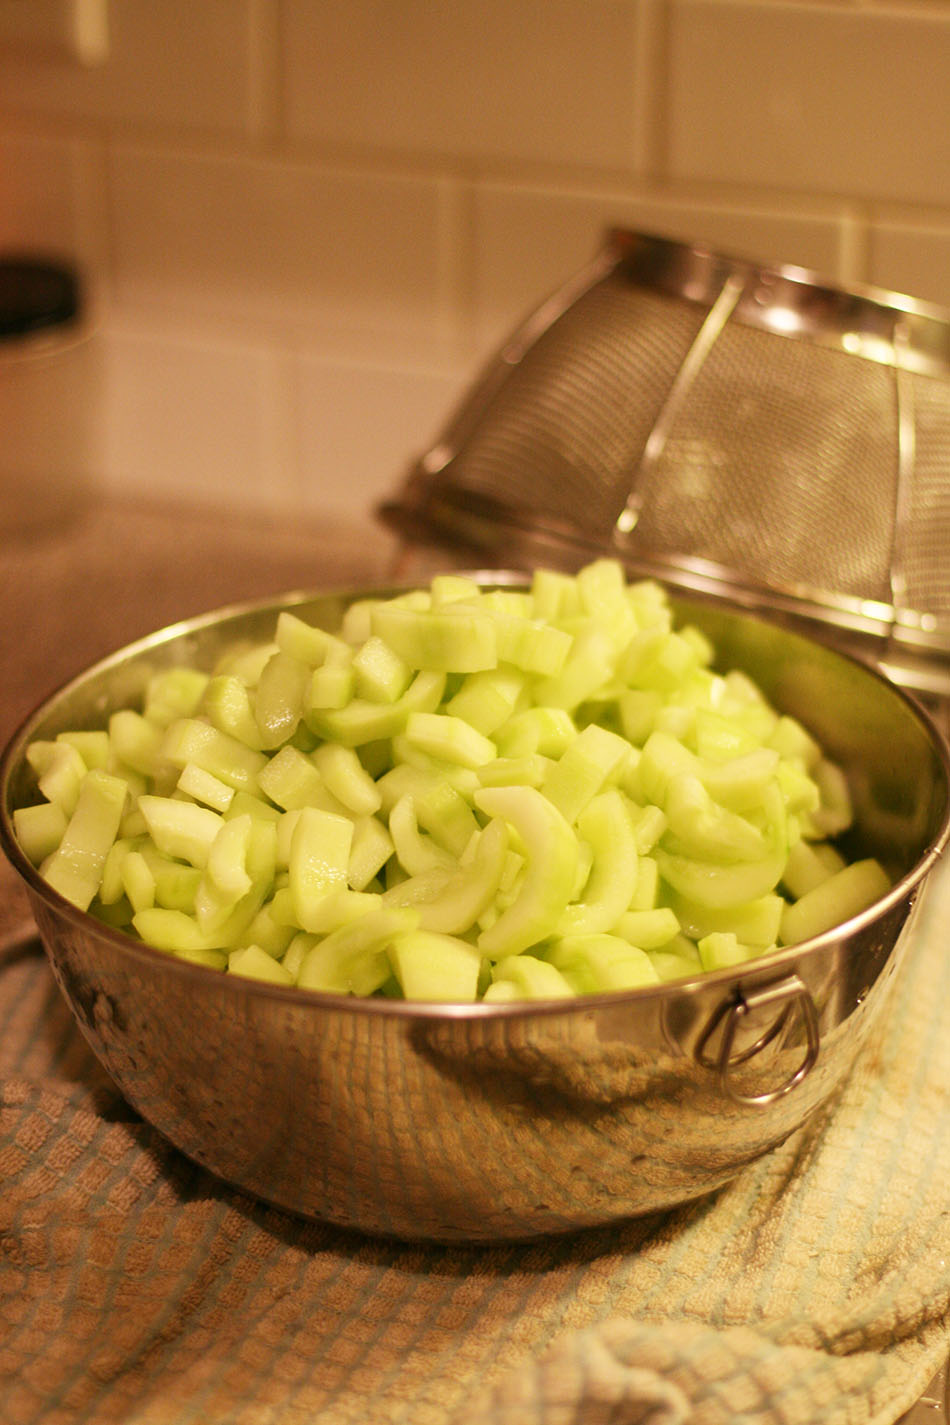 Cucumbers after soaking in pickling lime solution. Click through to learn how to make homemade Christmas pickles.